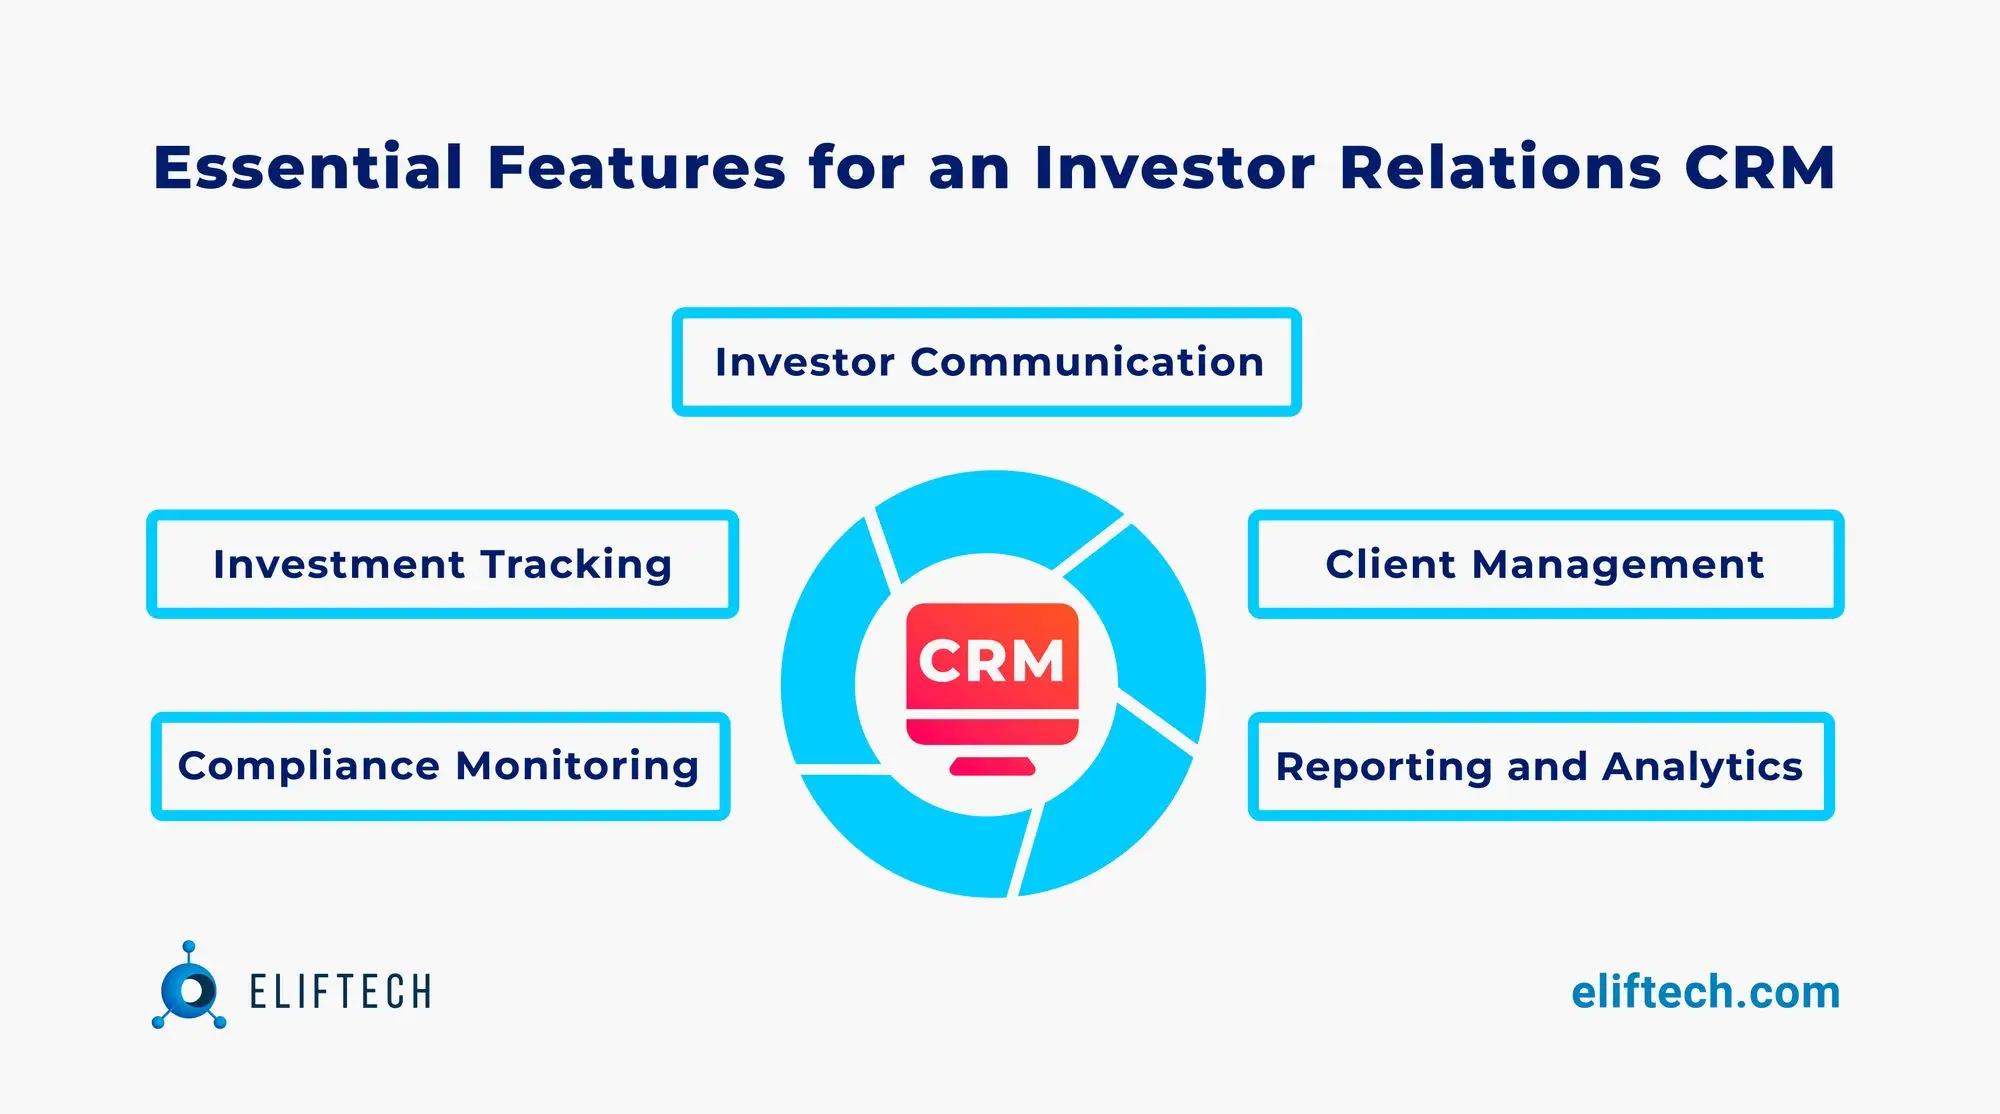 Essential functionalities for a CRM tailored to investor management